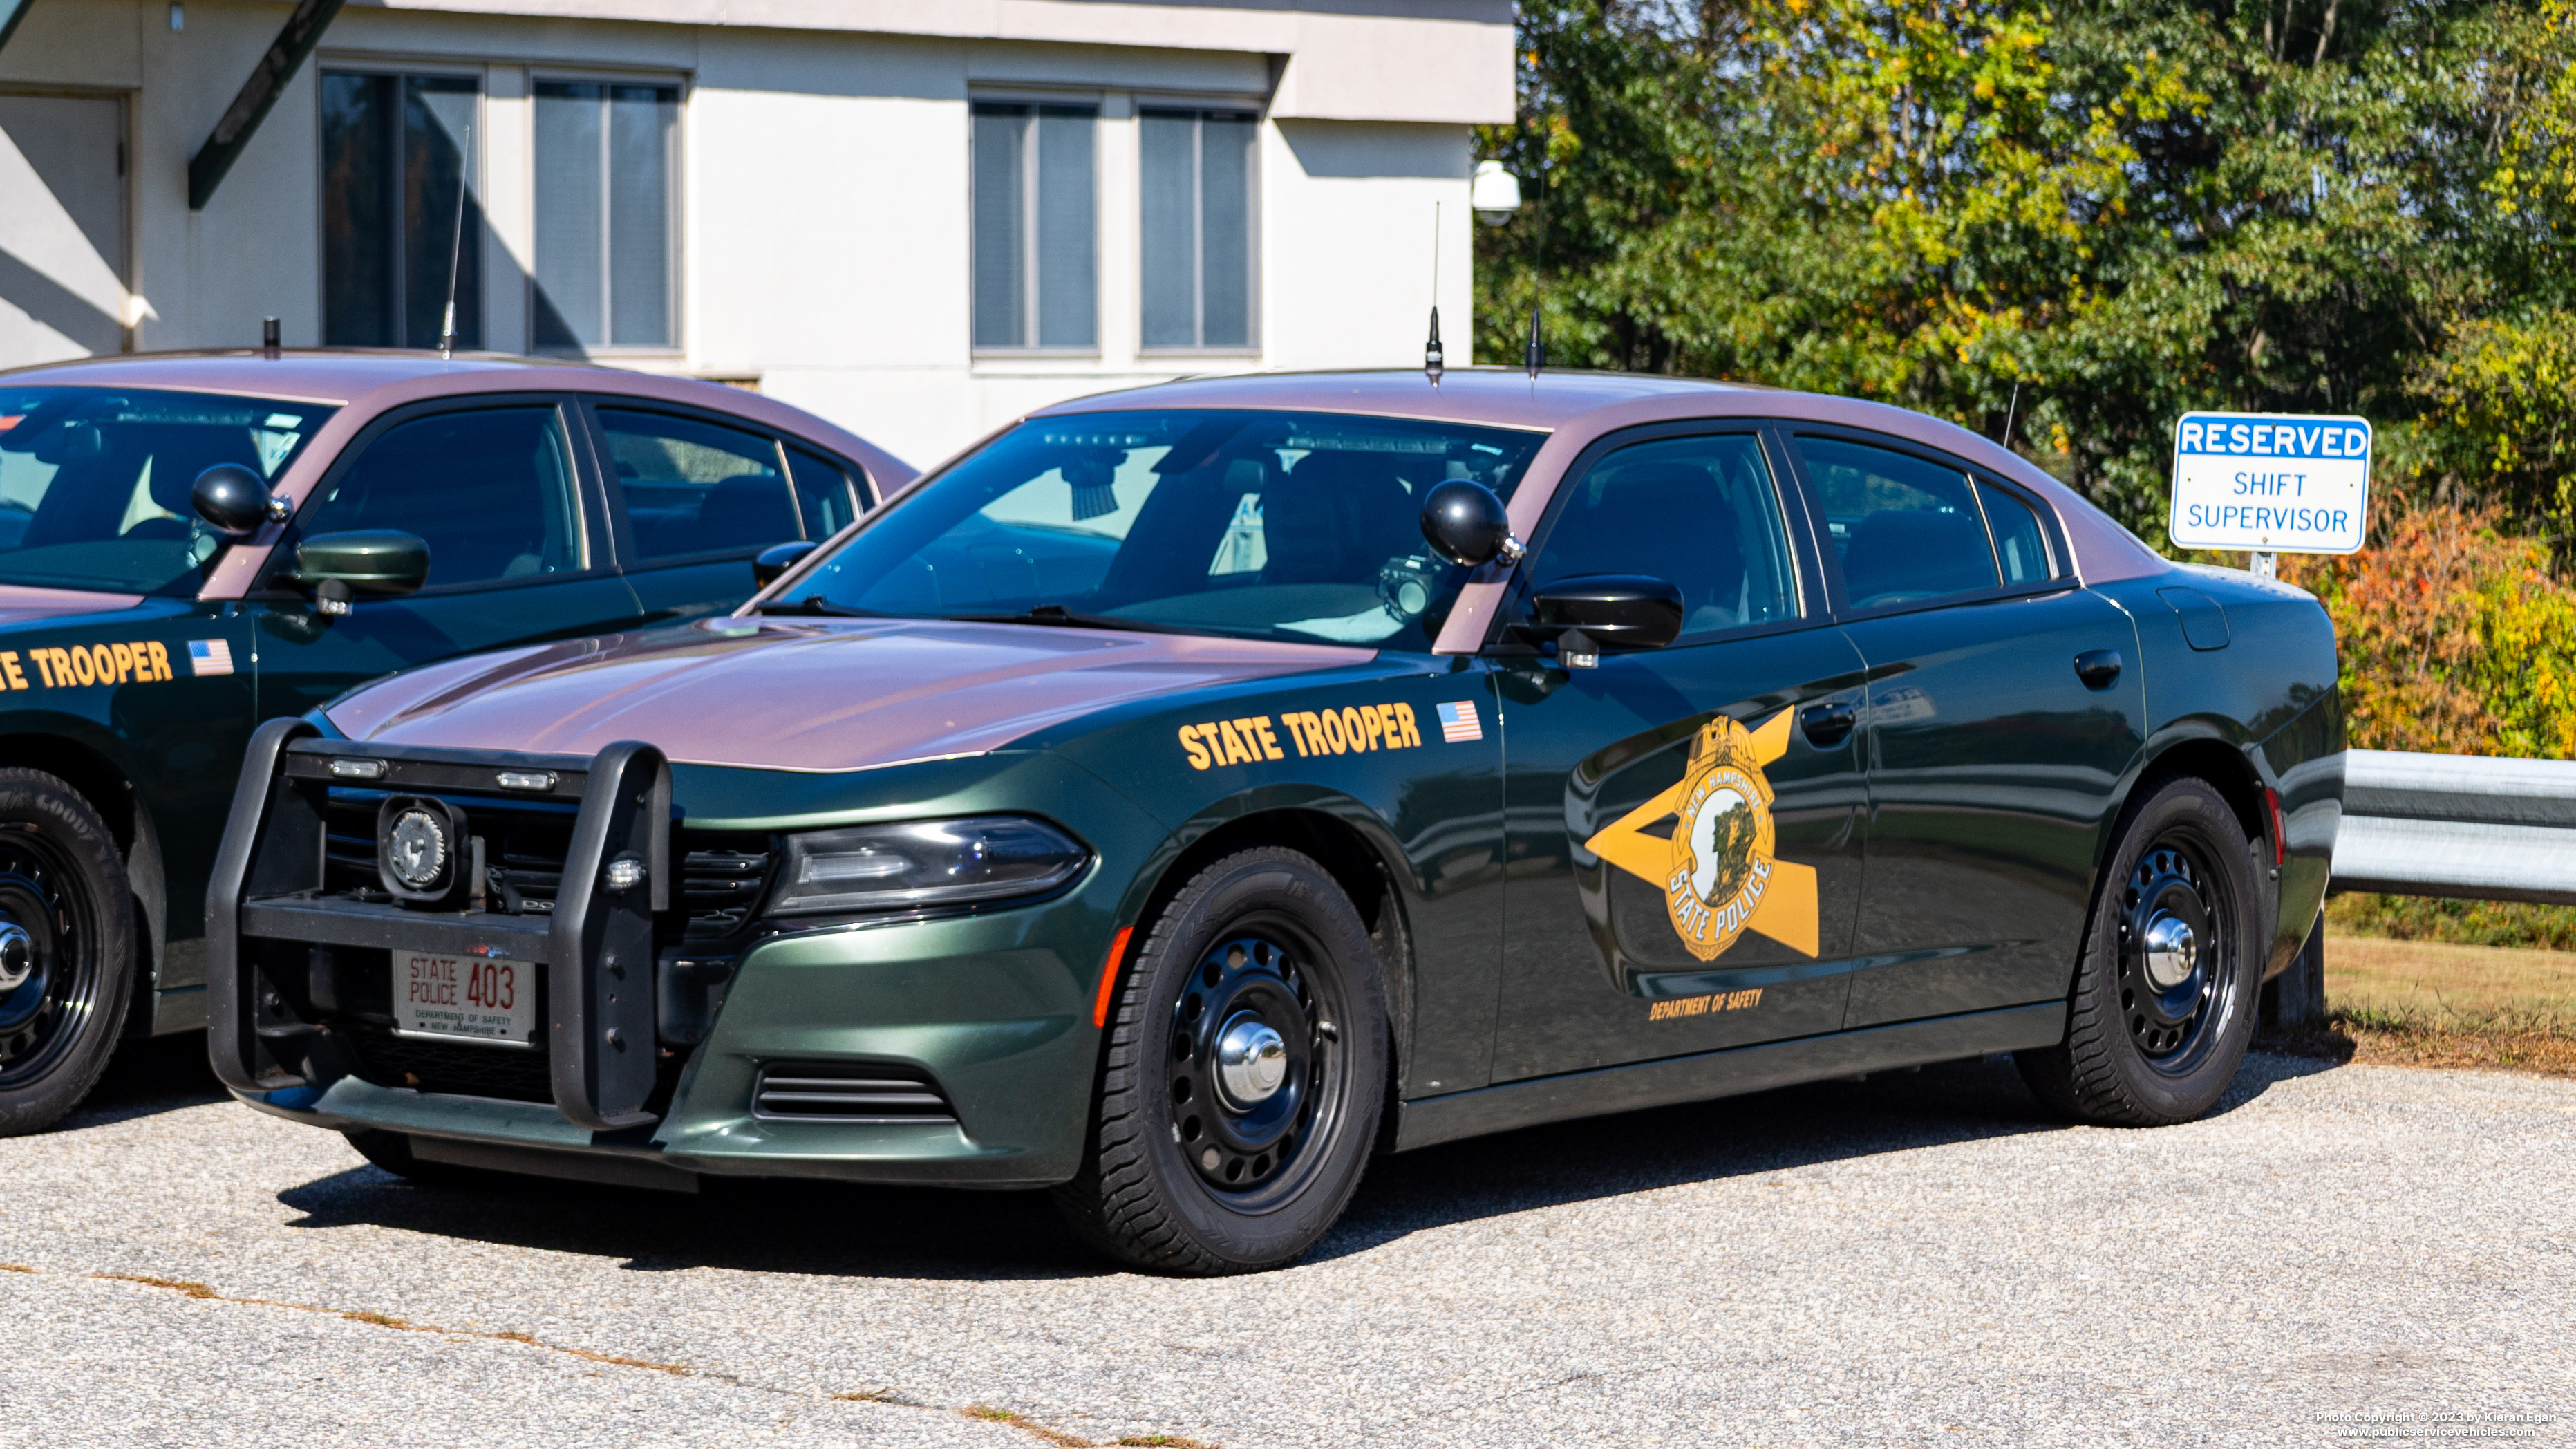 A photo  of New Hampshire State Police
            Cruiser 403, a 2017-2019 Dodge Charger             taken by Kieran Egan